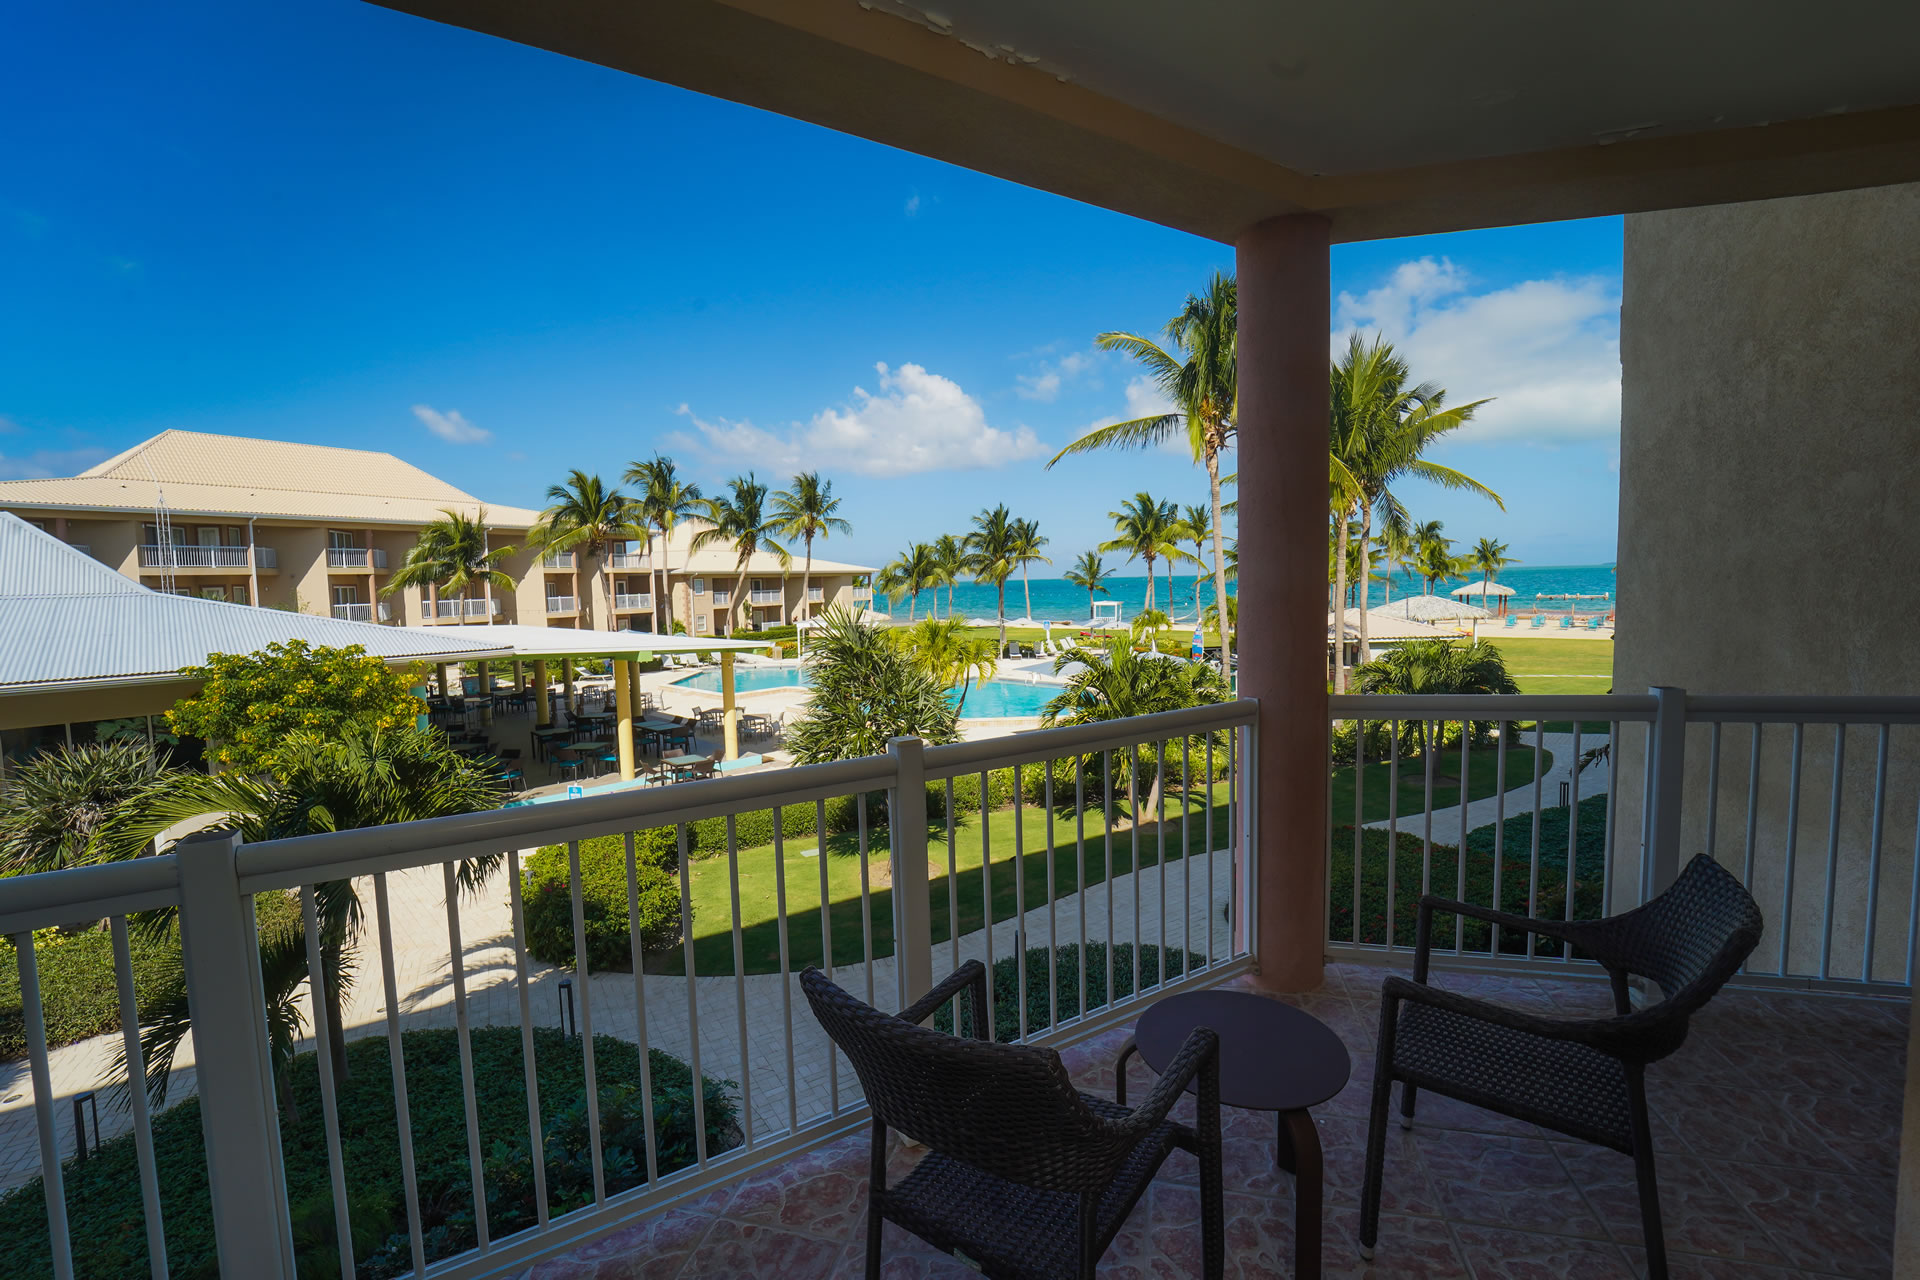 View of the resort pool and courtyard from the balcony of a guest suite at the Grand Caymanian Resort.